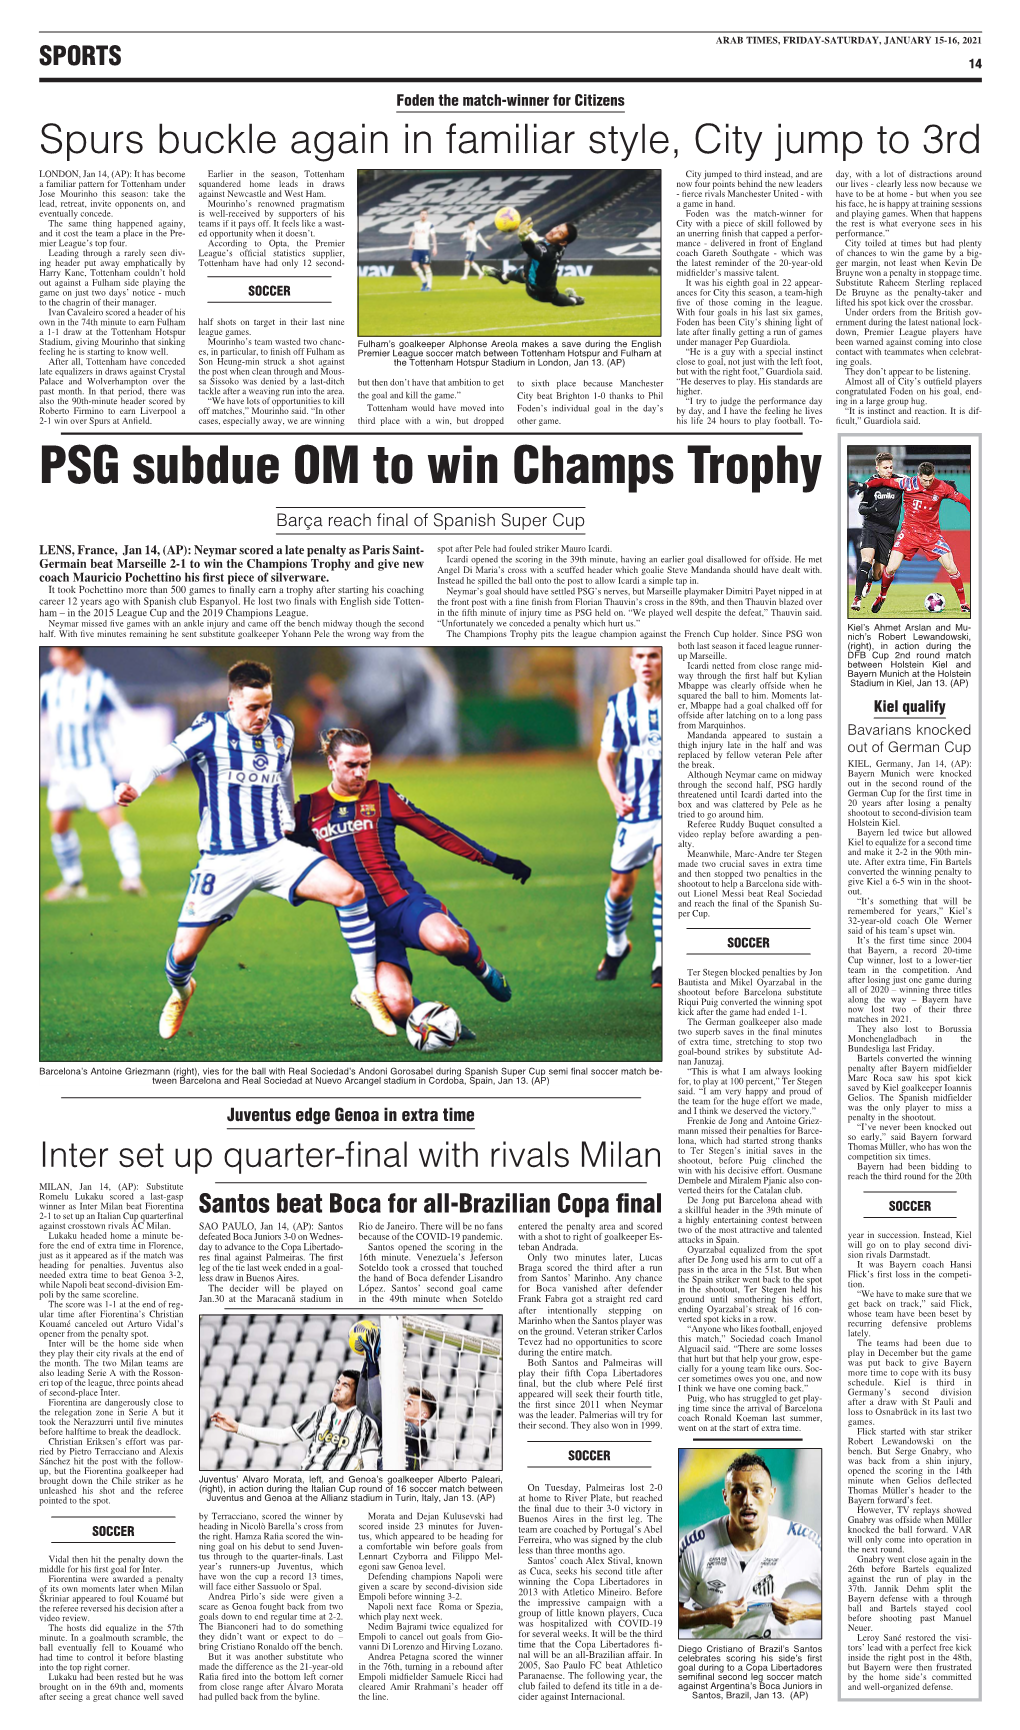 PSG Subdue OM to Win Champs Trophy